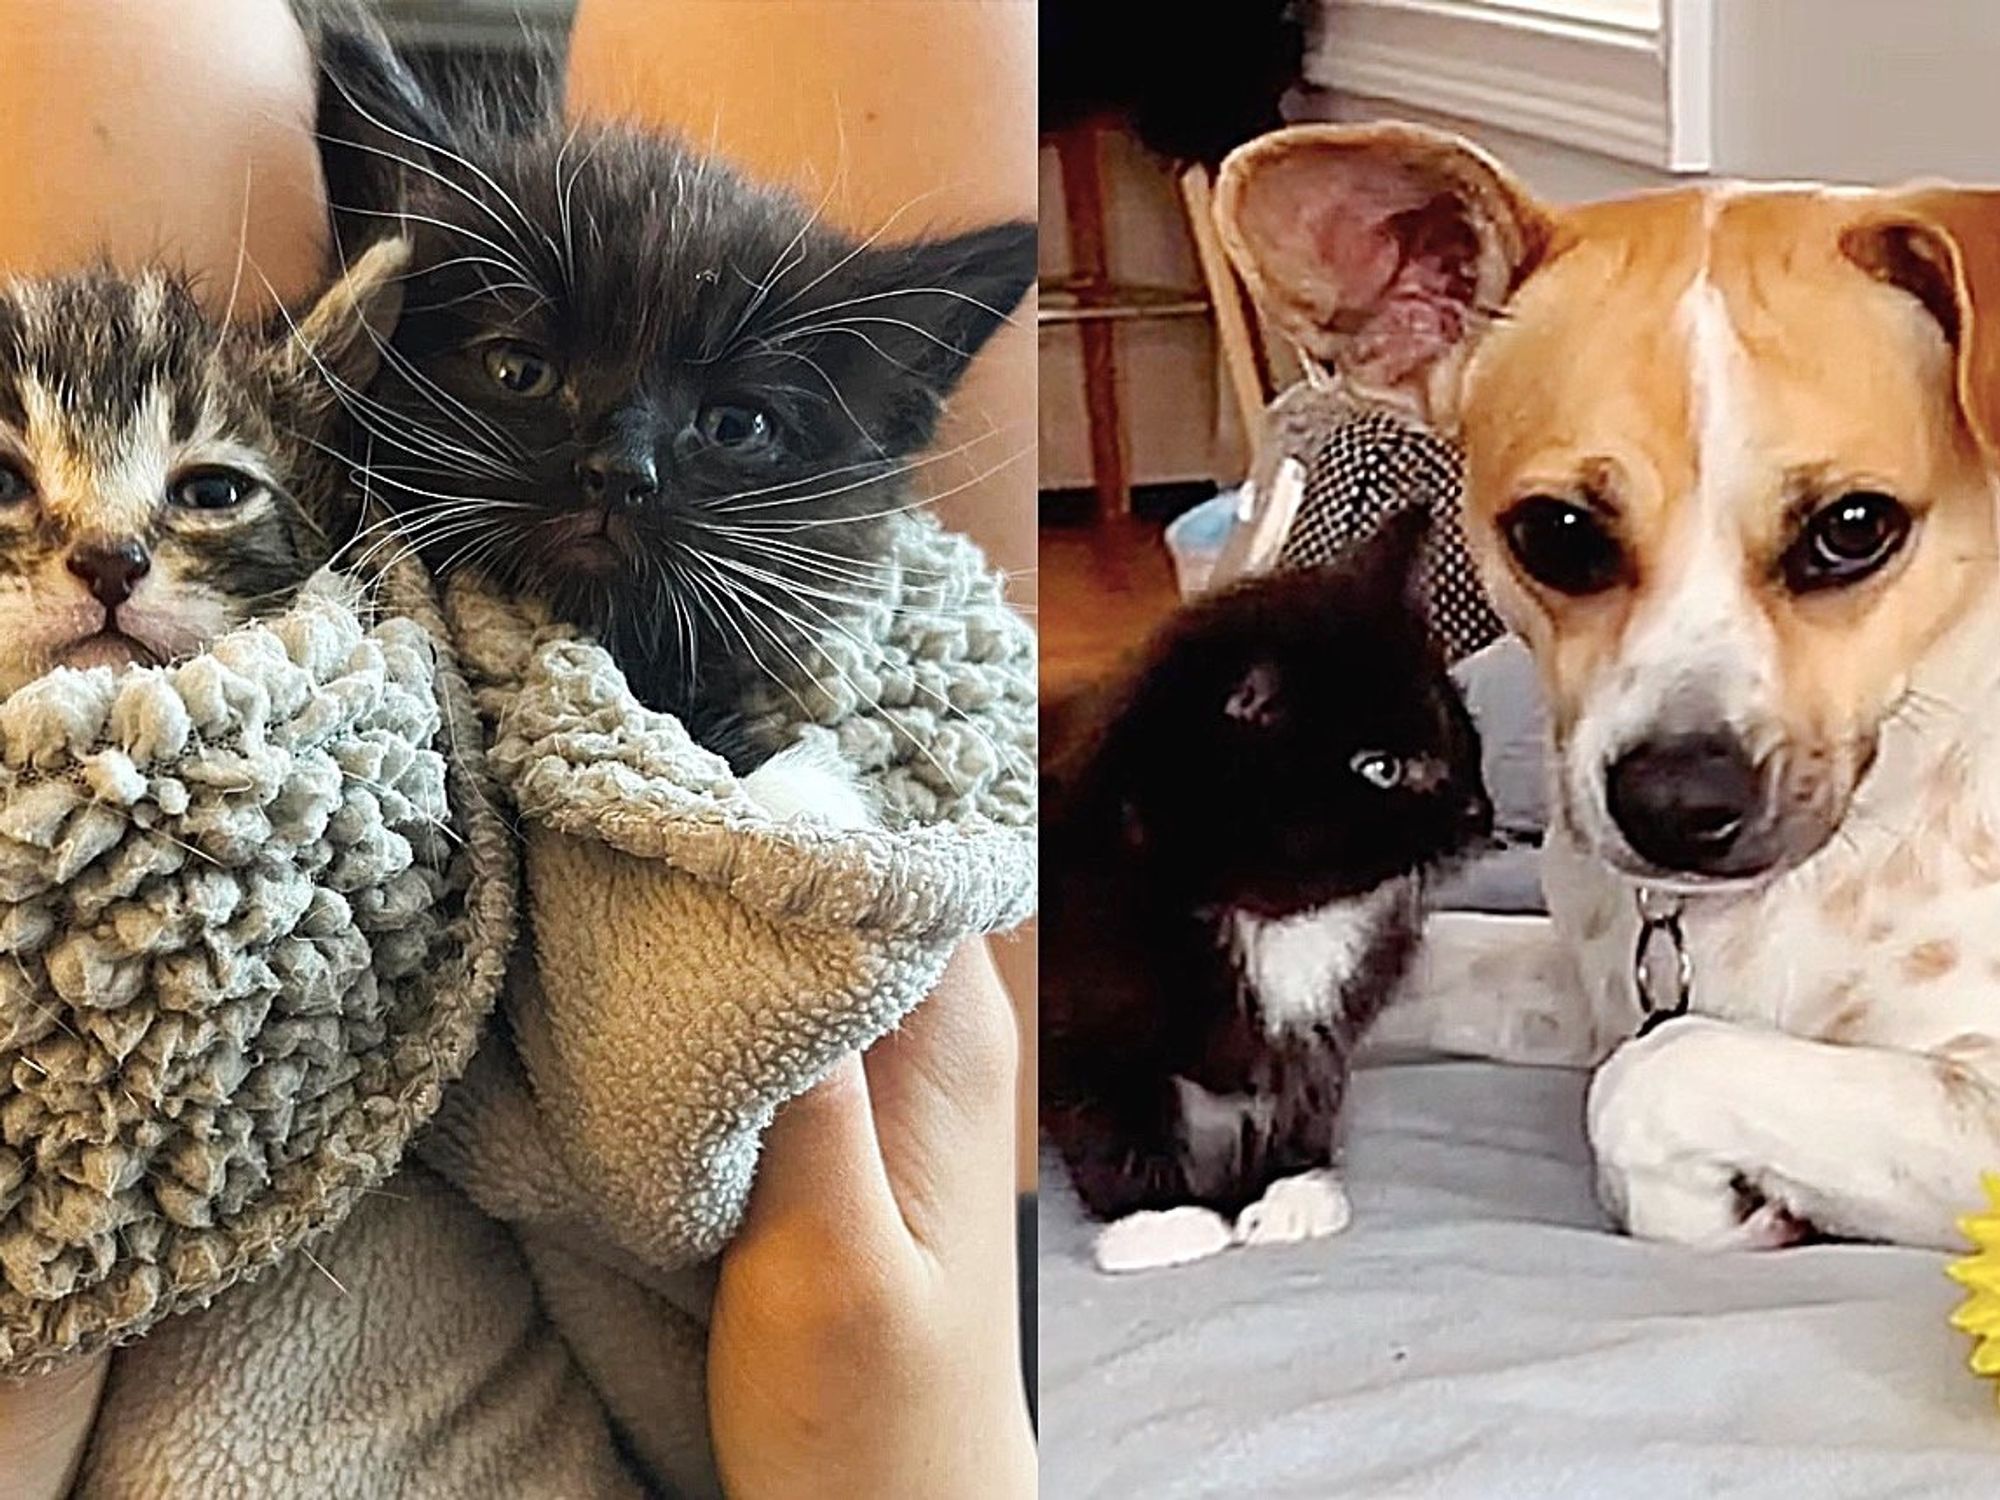 Kittens Arrive at Rescue Needing Help and TLC, They Meet Dog Who Knows Just How to Cheer Them Up